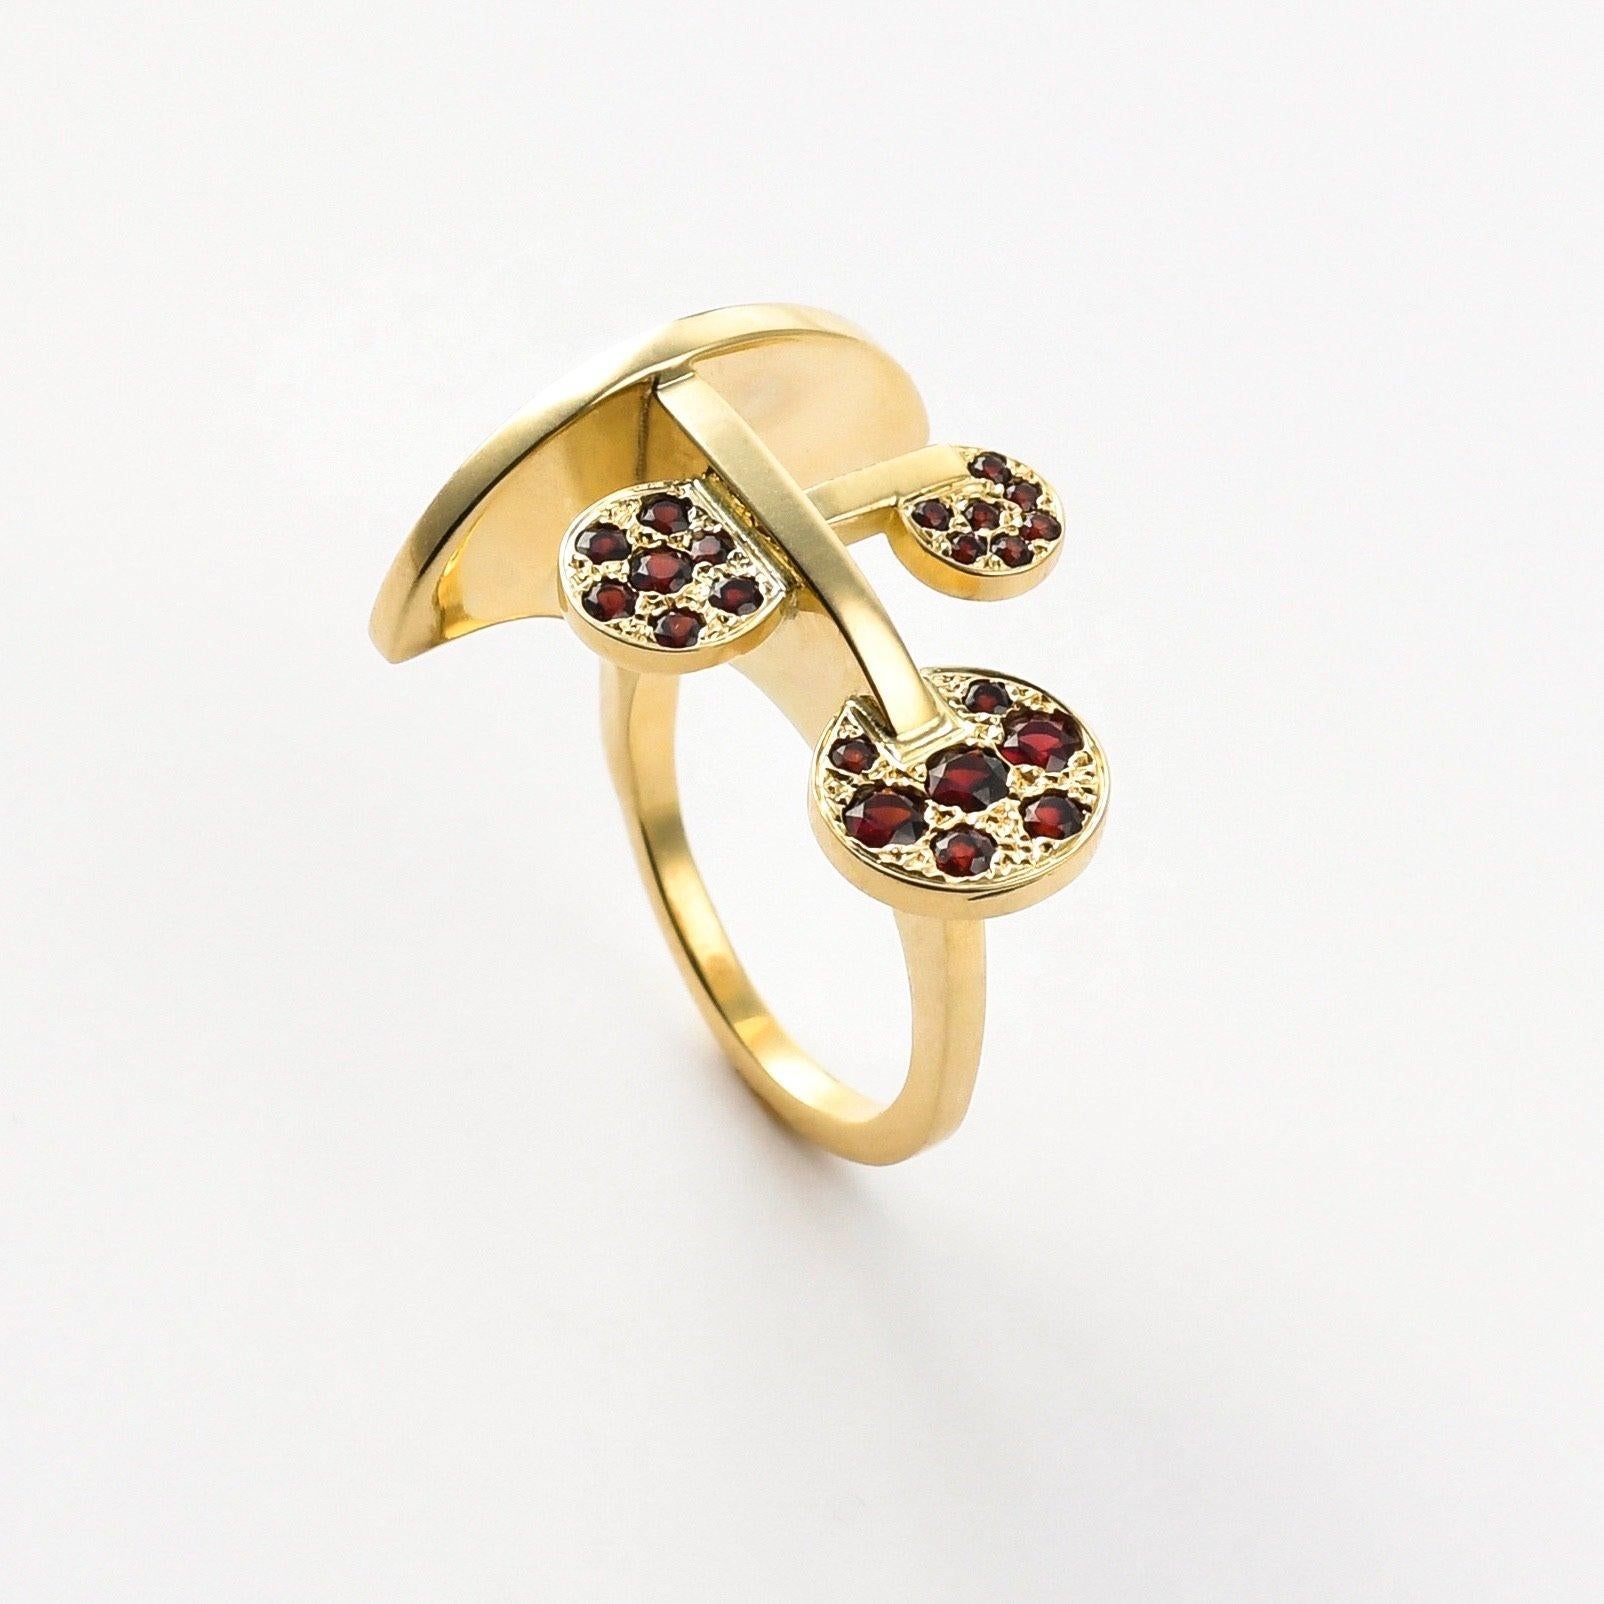 The 'Hovering Disk’, ring is crafted in 18k gold, hallmarked in Cyprus. This innovative, contemporary, sculptural ring, comes in a highly polished finish and features Wine Red Garnets totalling 0,5 Cts. Equally impressive on an end or middle finger,